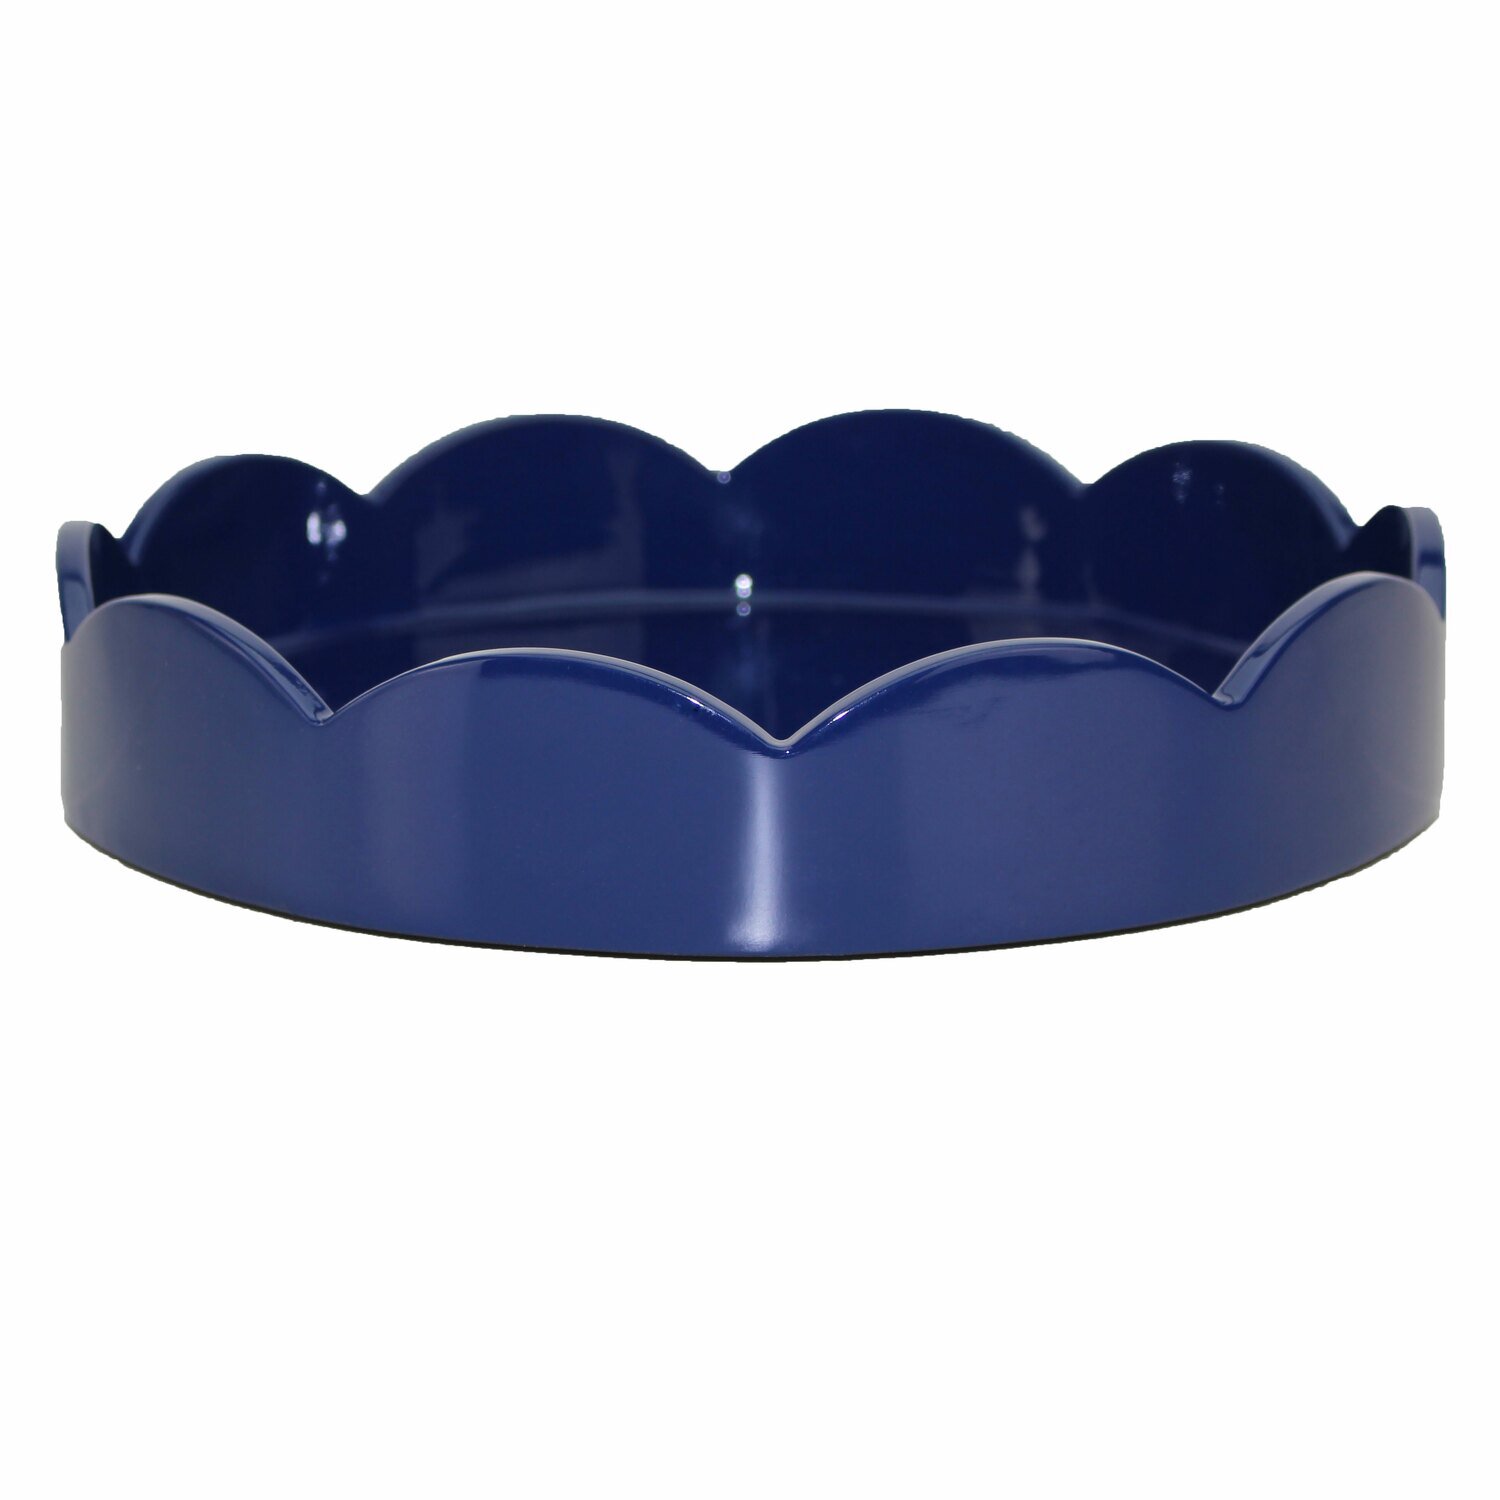 Addison Ross 8.5 x 8.5 Inch Scallop Tray Navy Wood TR6402